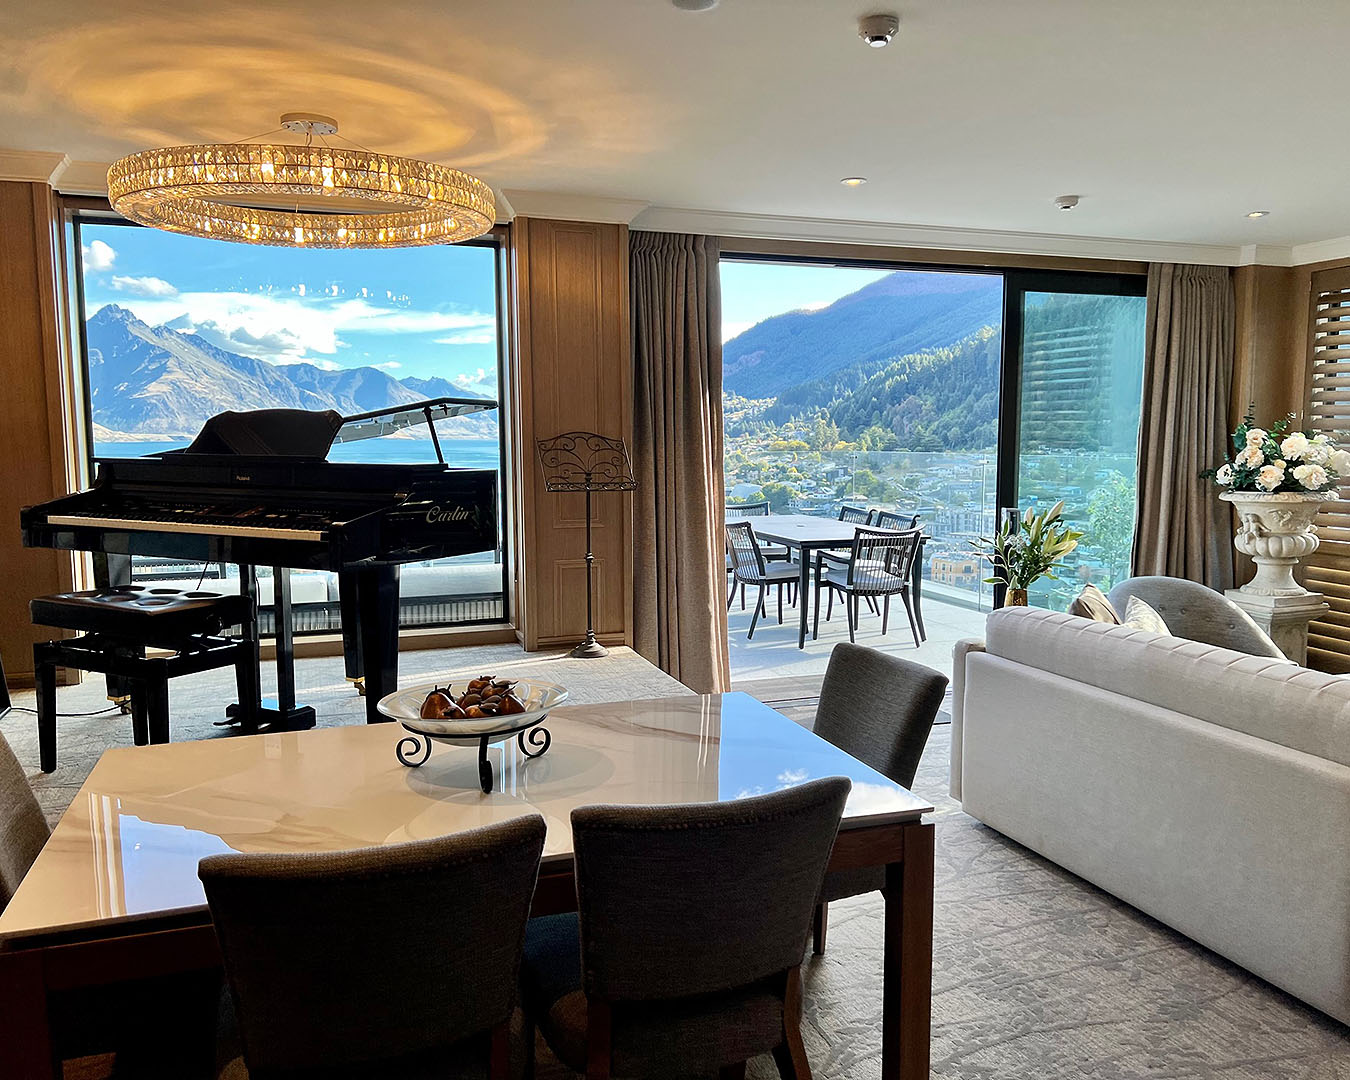 A view of the presidential suite at The Carlin, one of the very best hotels in Queenstown.